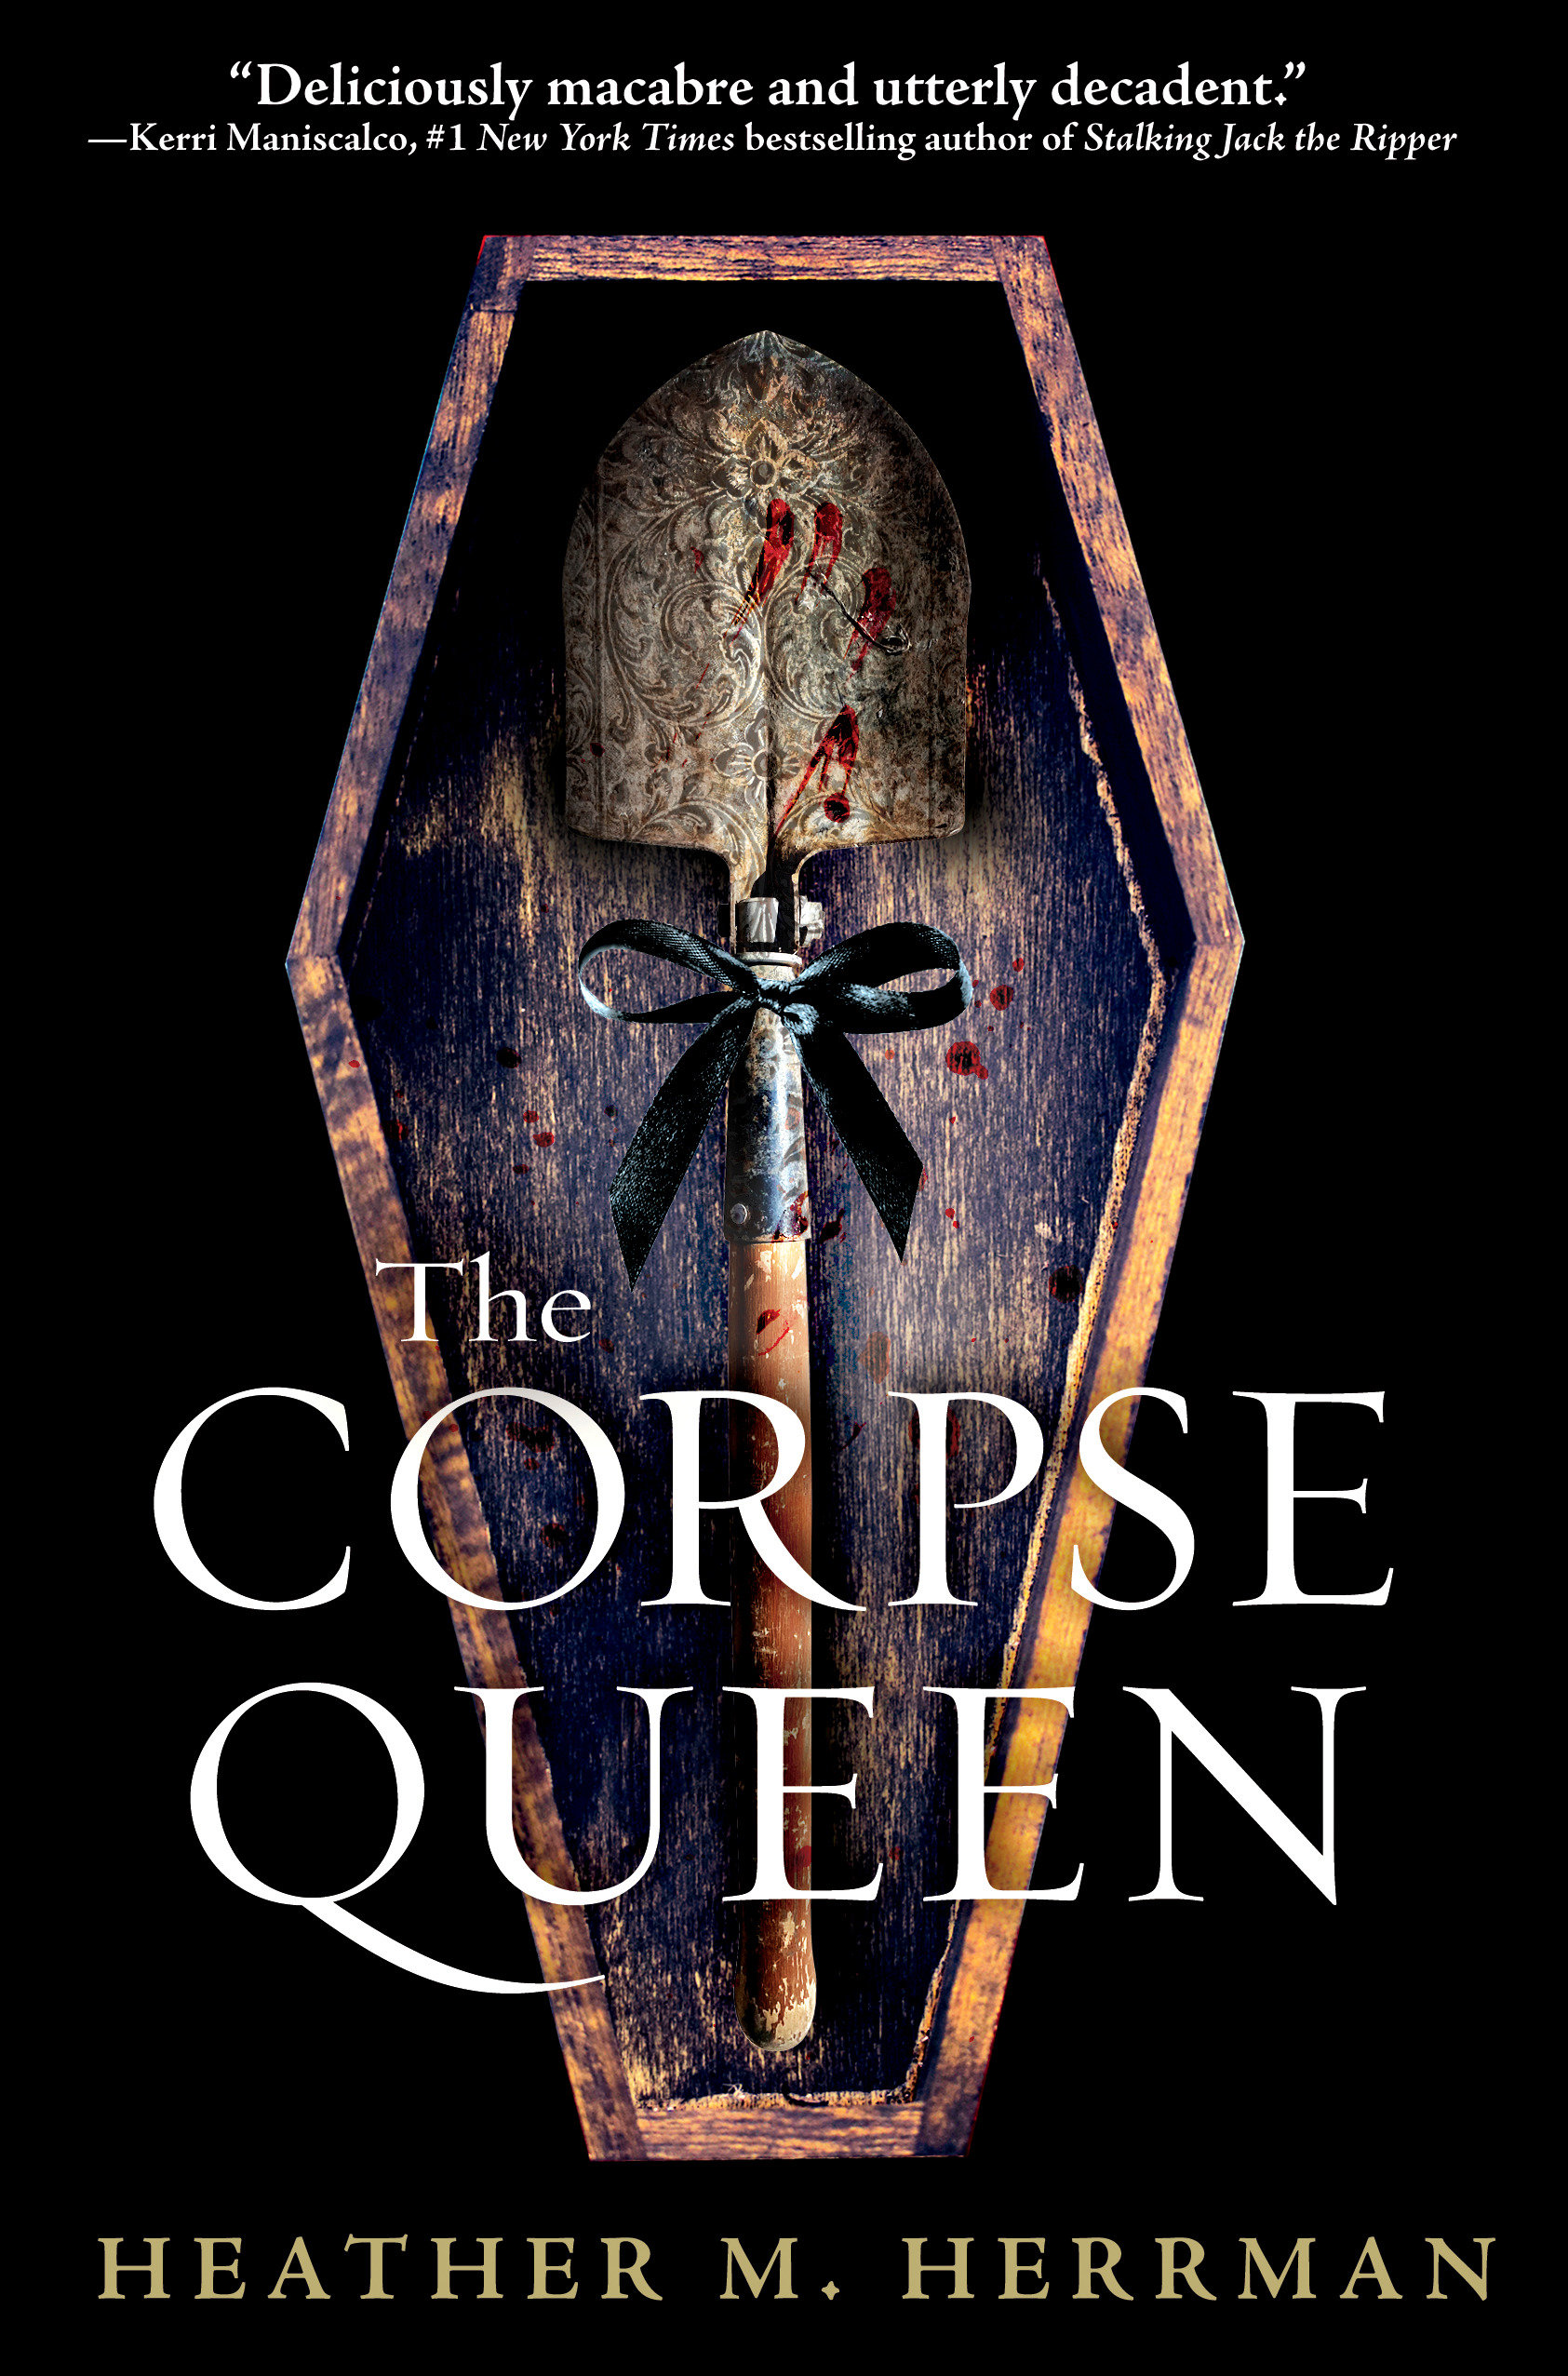 The Corpse Queen (Hardcover Book)